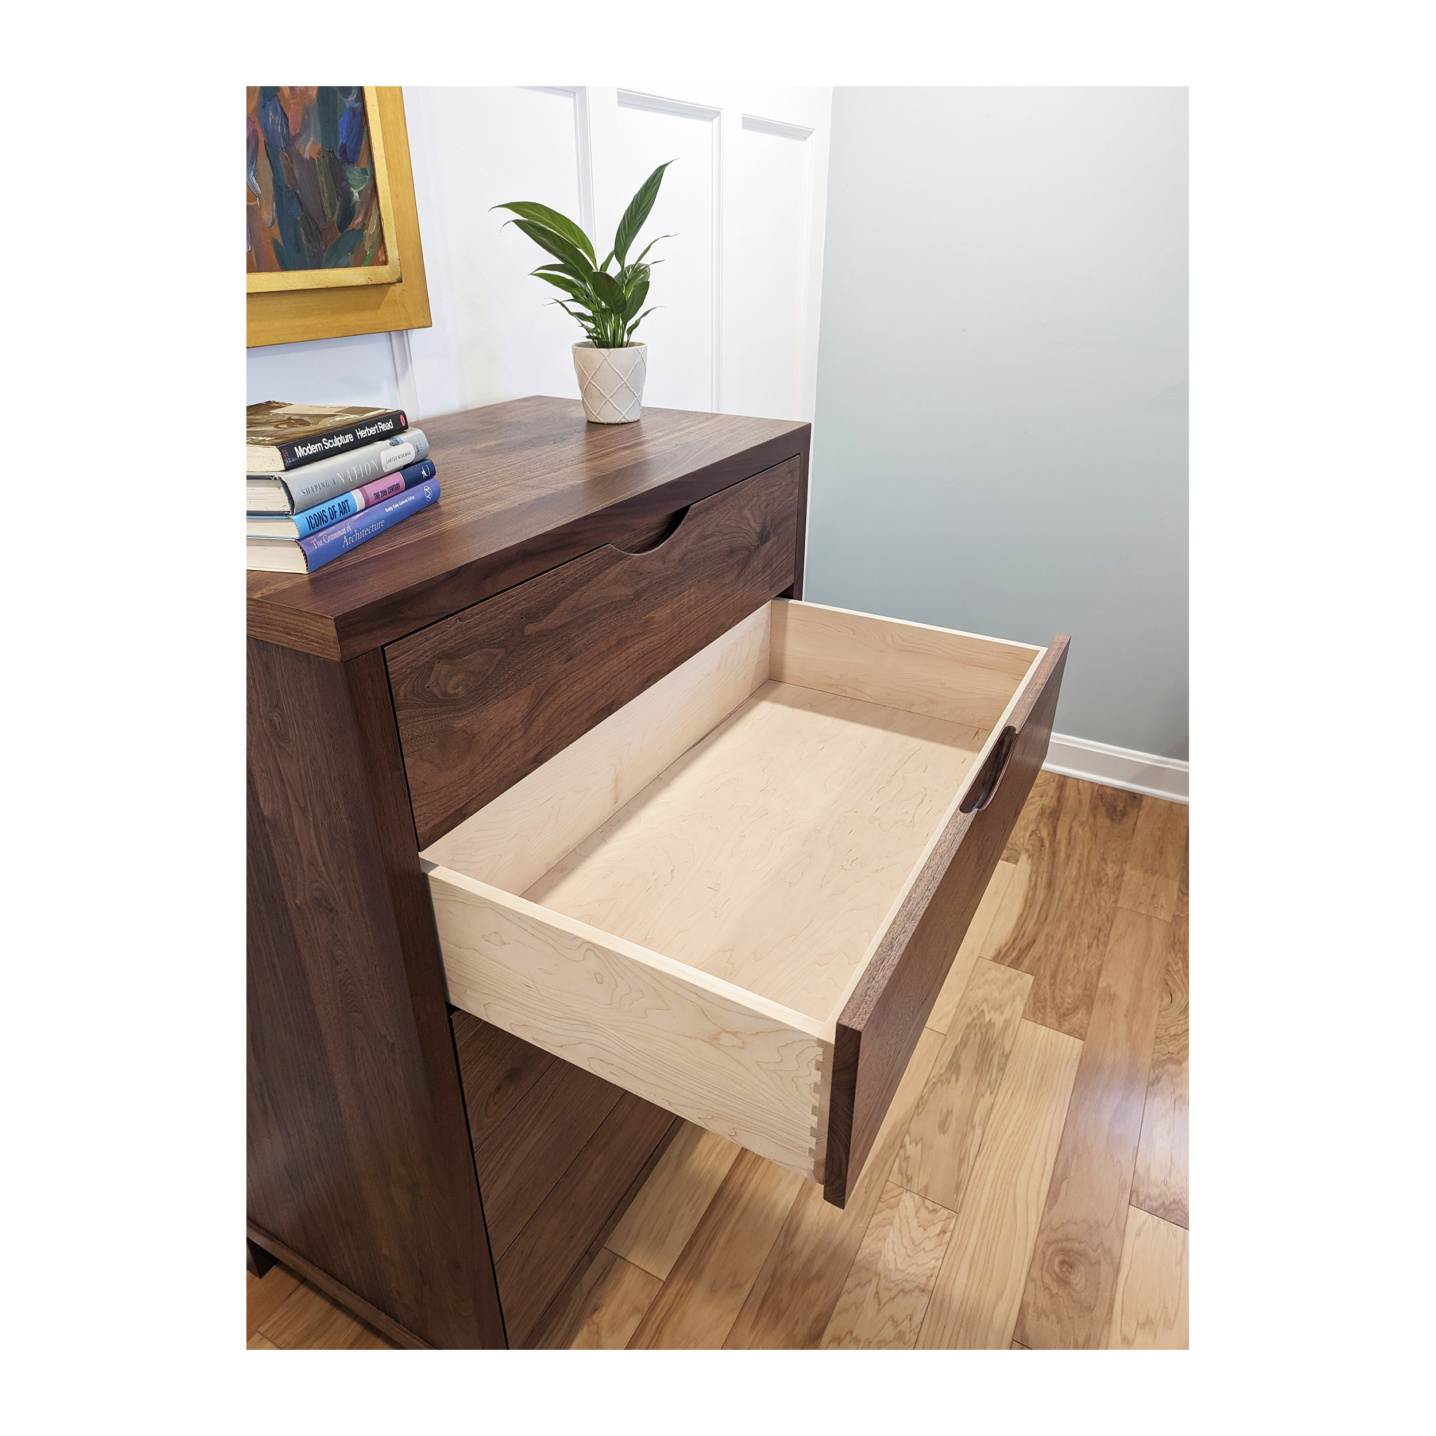 Solid maple English dovetail dresser drawers